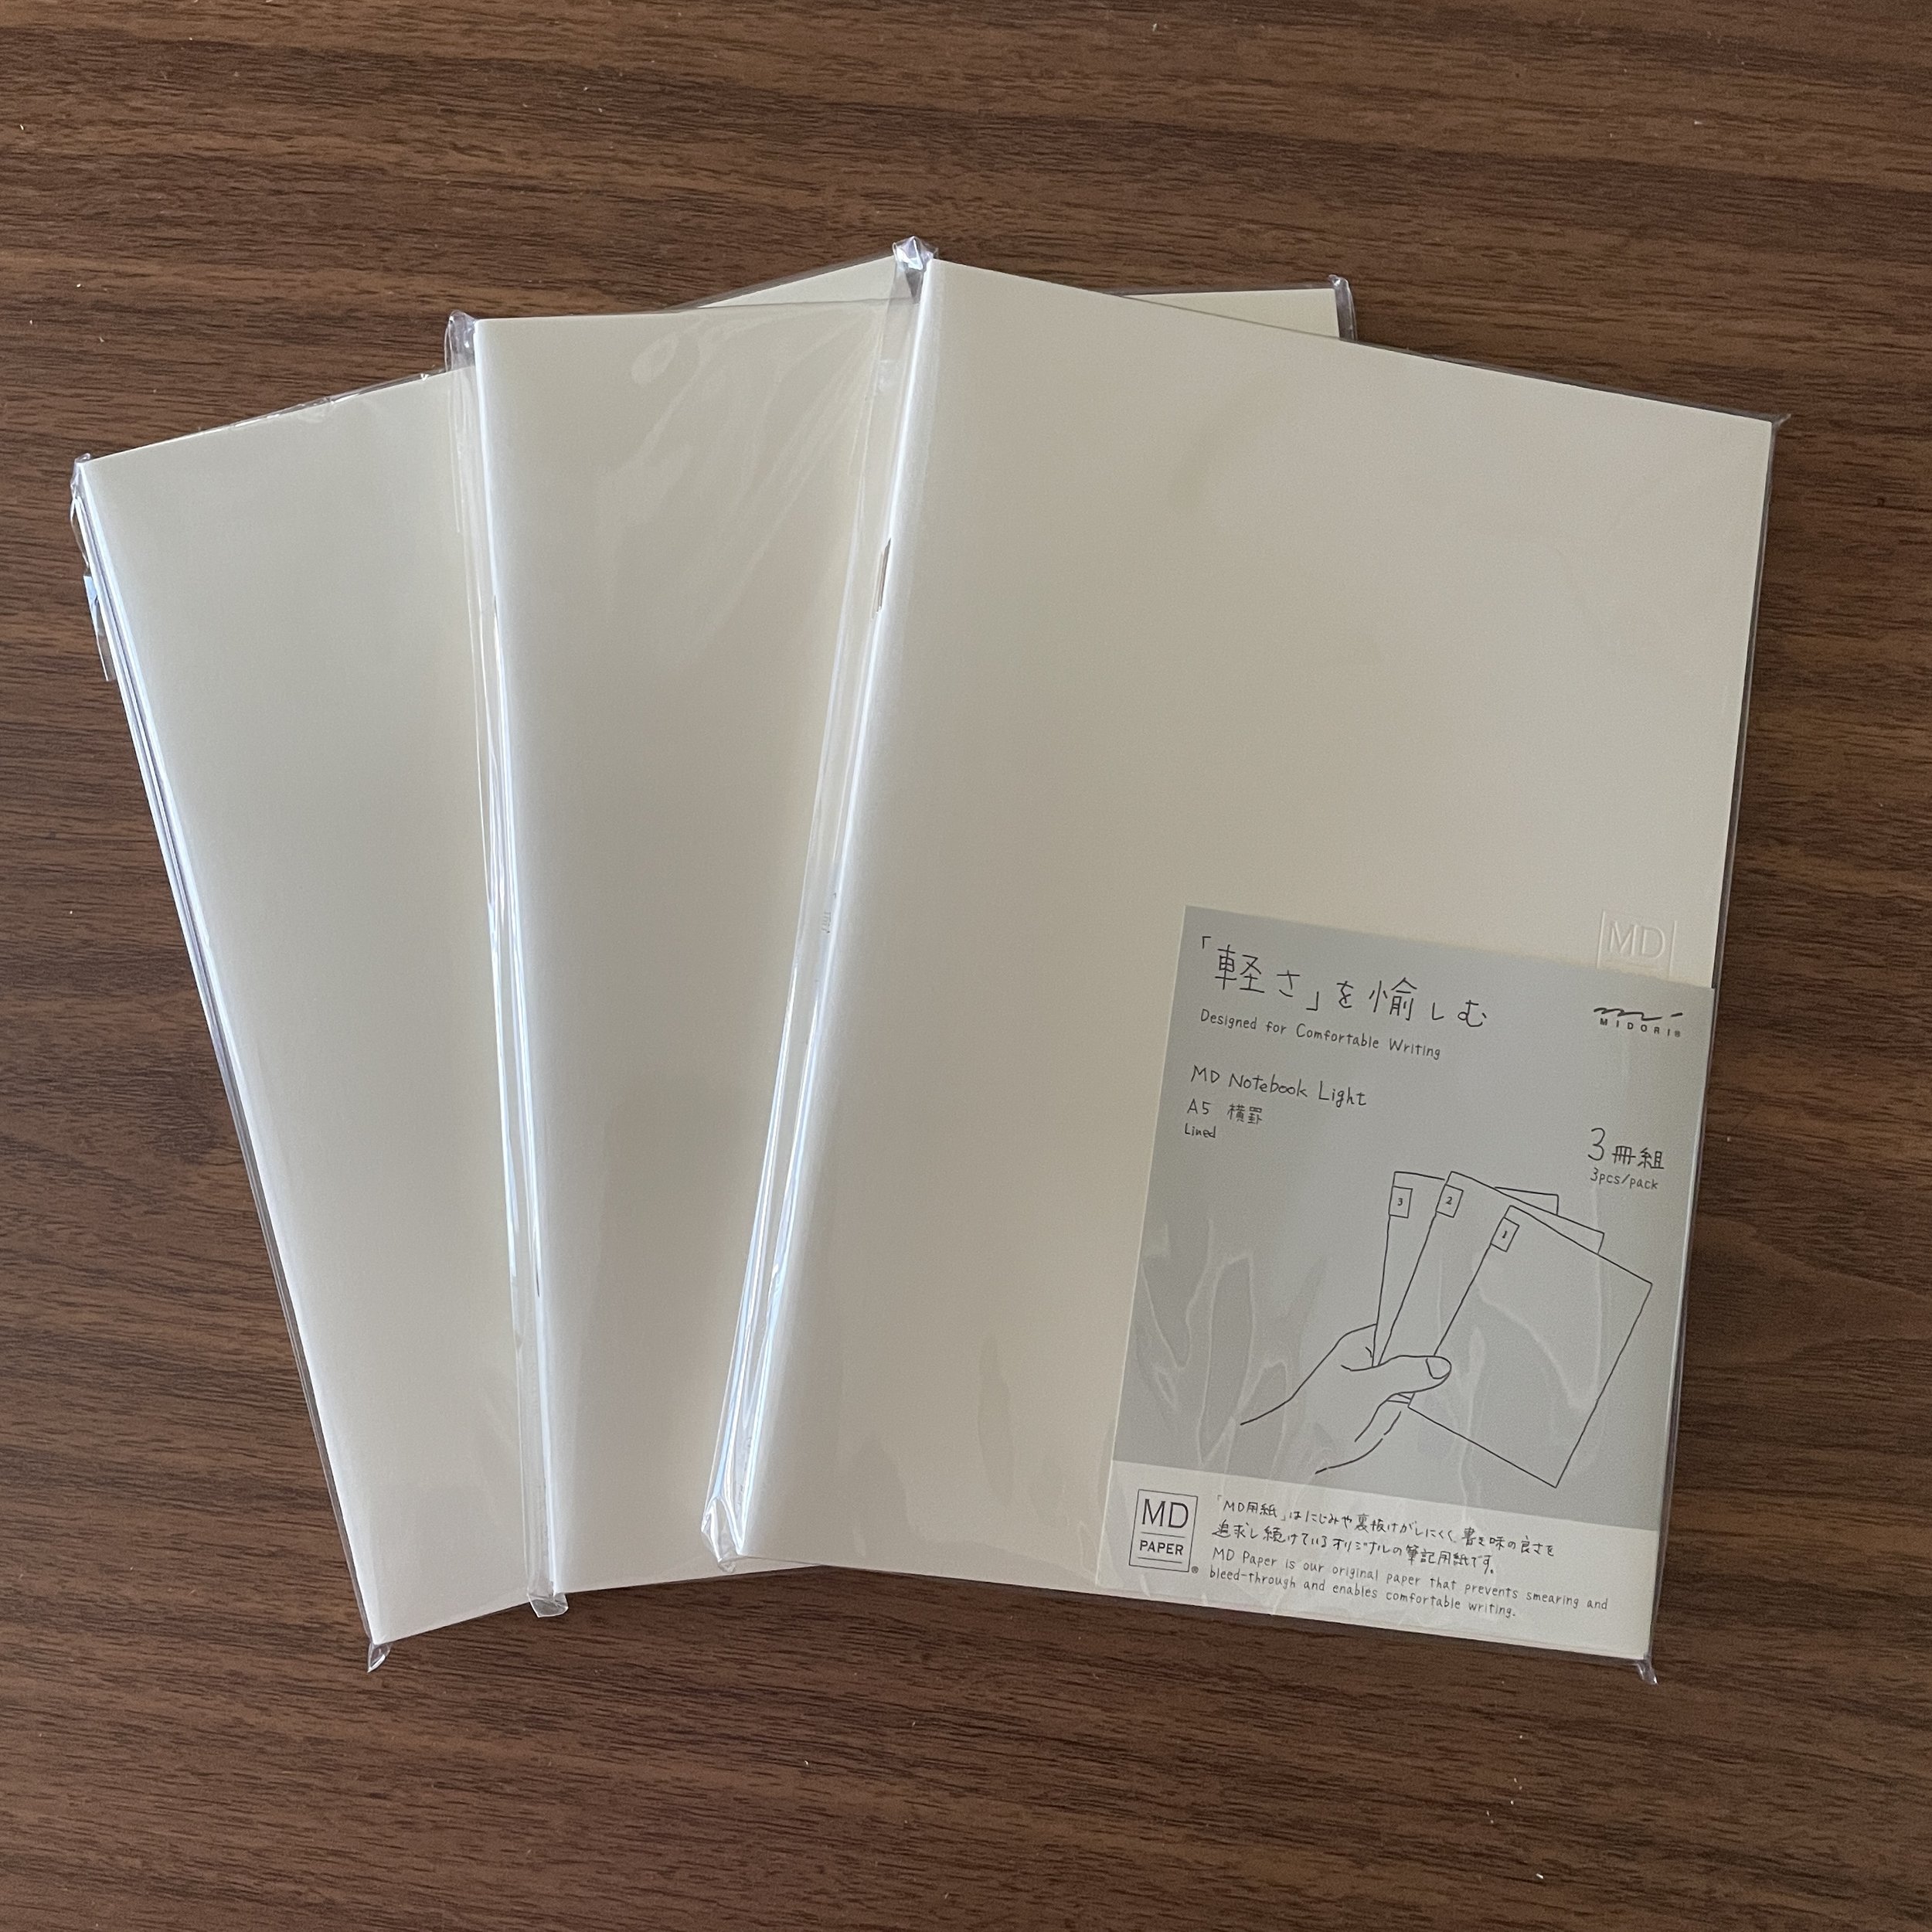 10Pck Small Pocket Notebook Refills Writing Notepads 40 Lined White Paper Sheets 